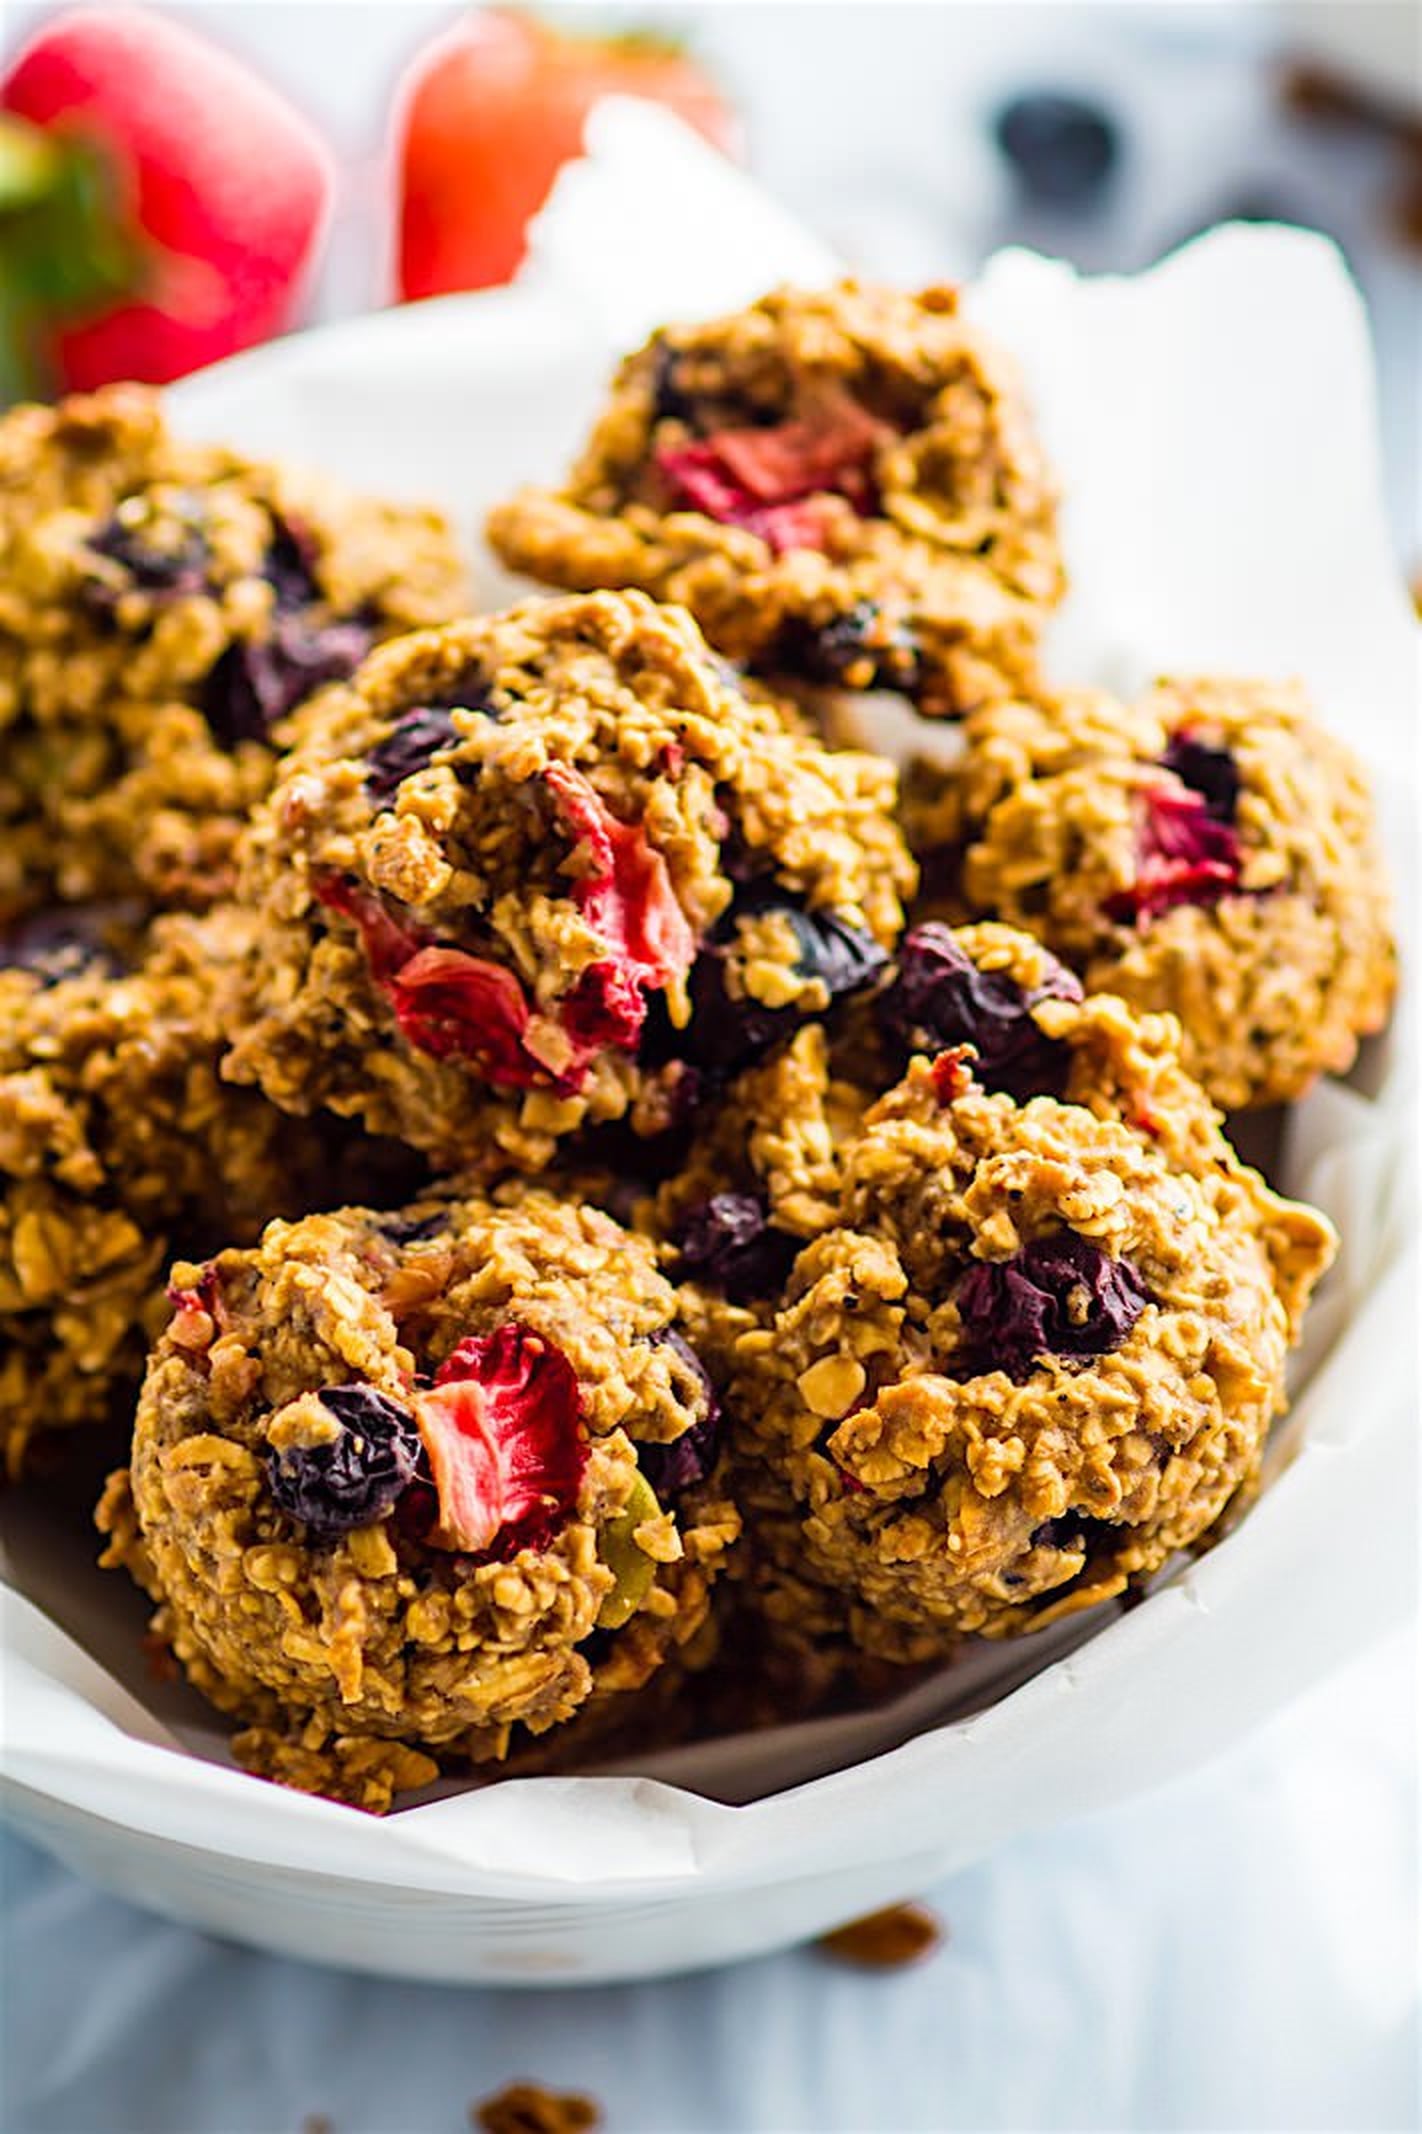 Healthy Breakfasts For on the Go | POPSUGAR Family